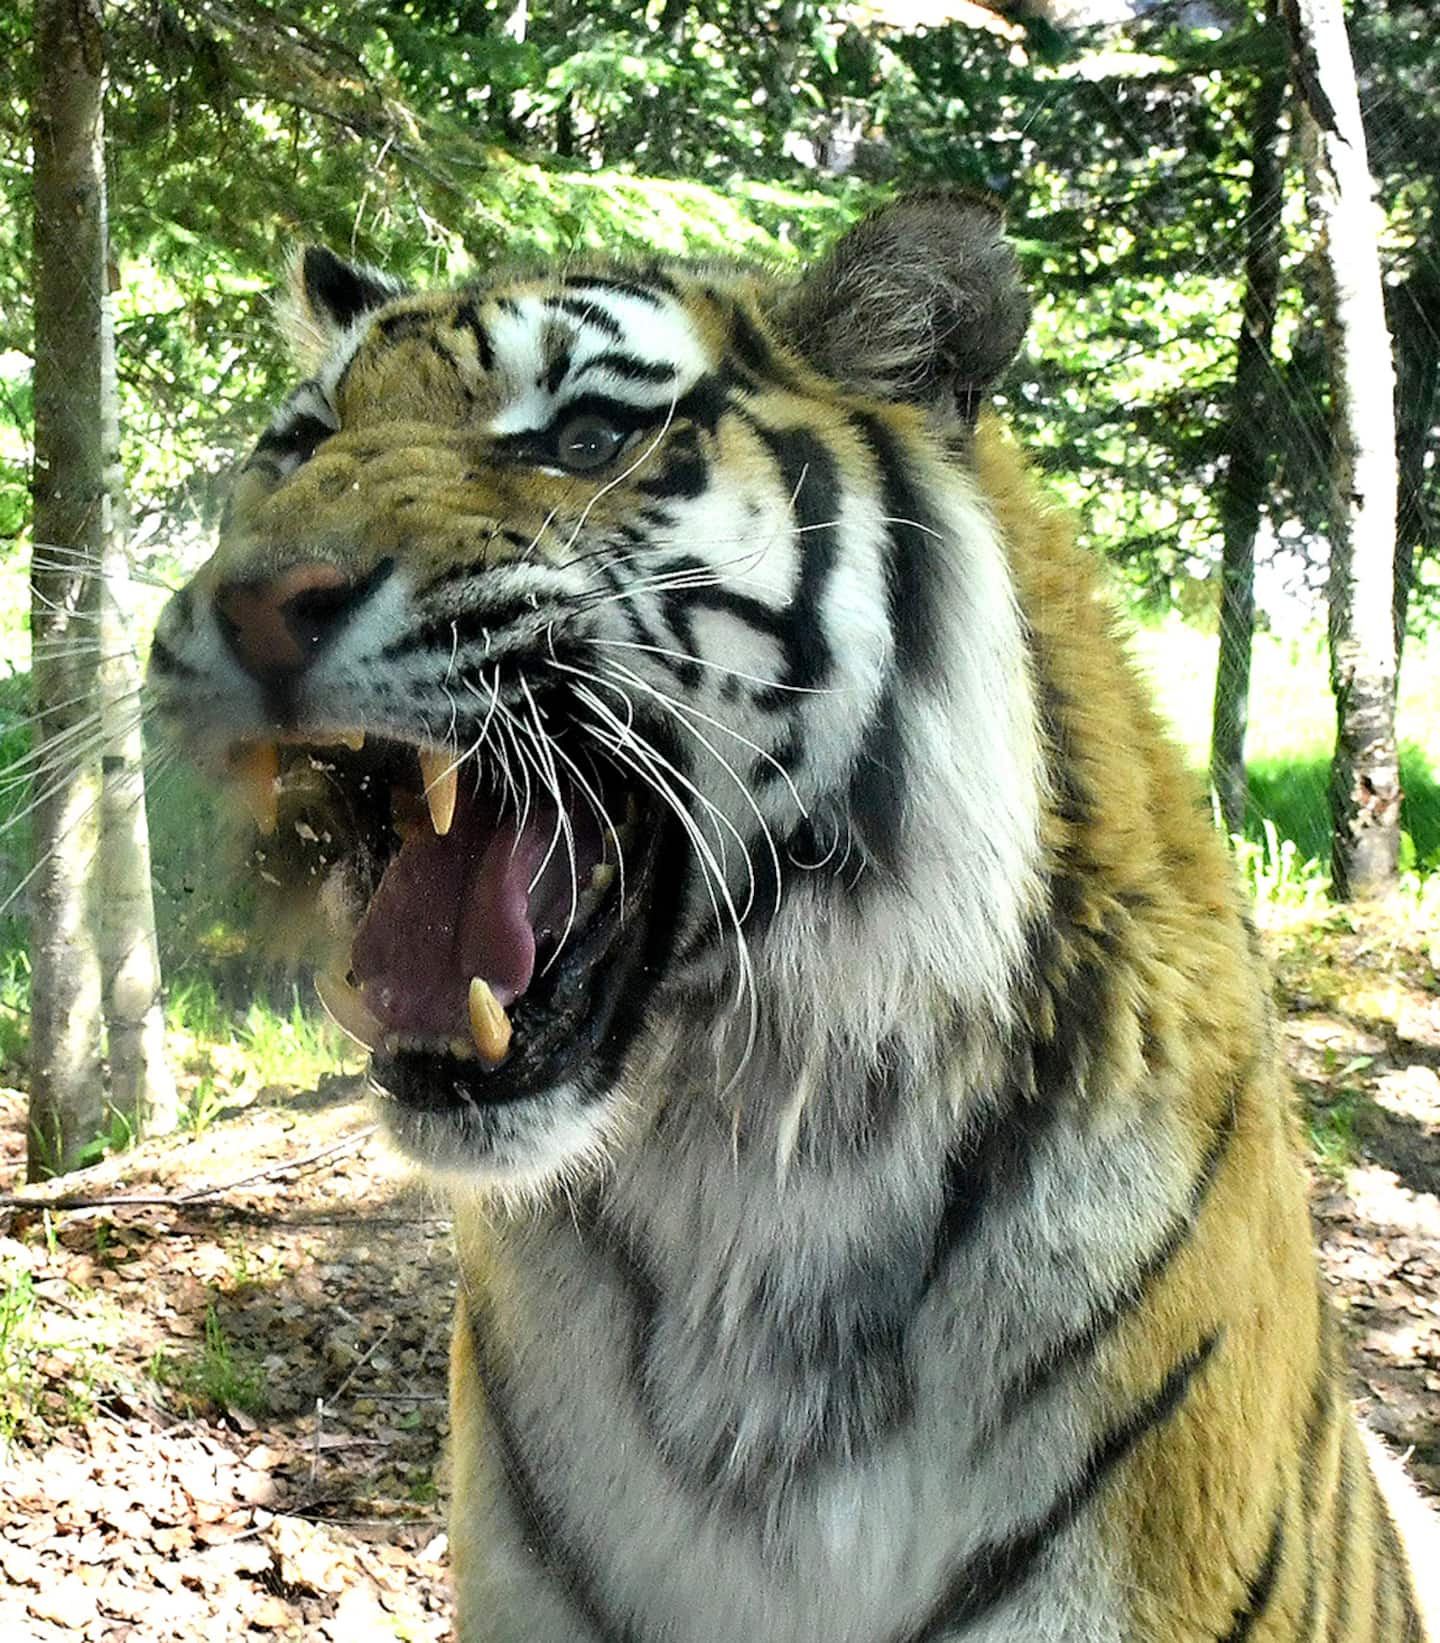 The Saint-Félicien zoo has only one tiger left